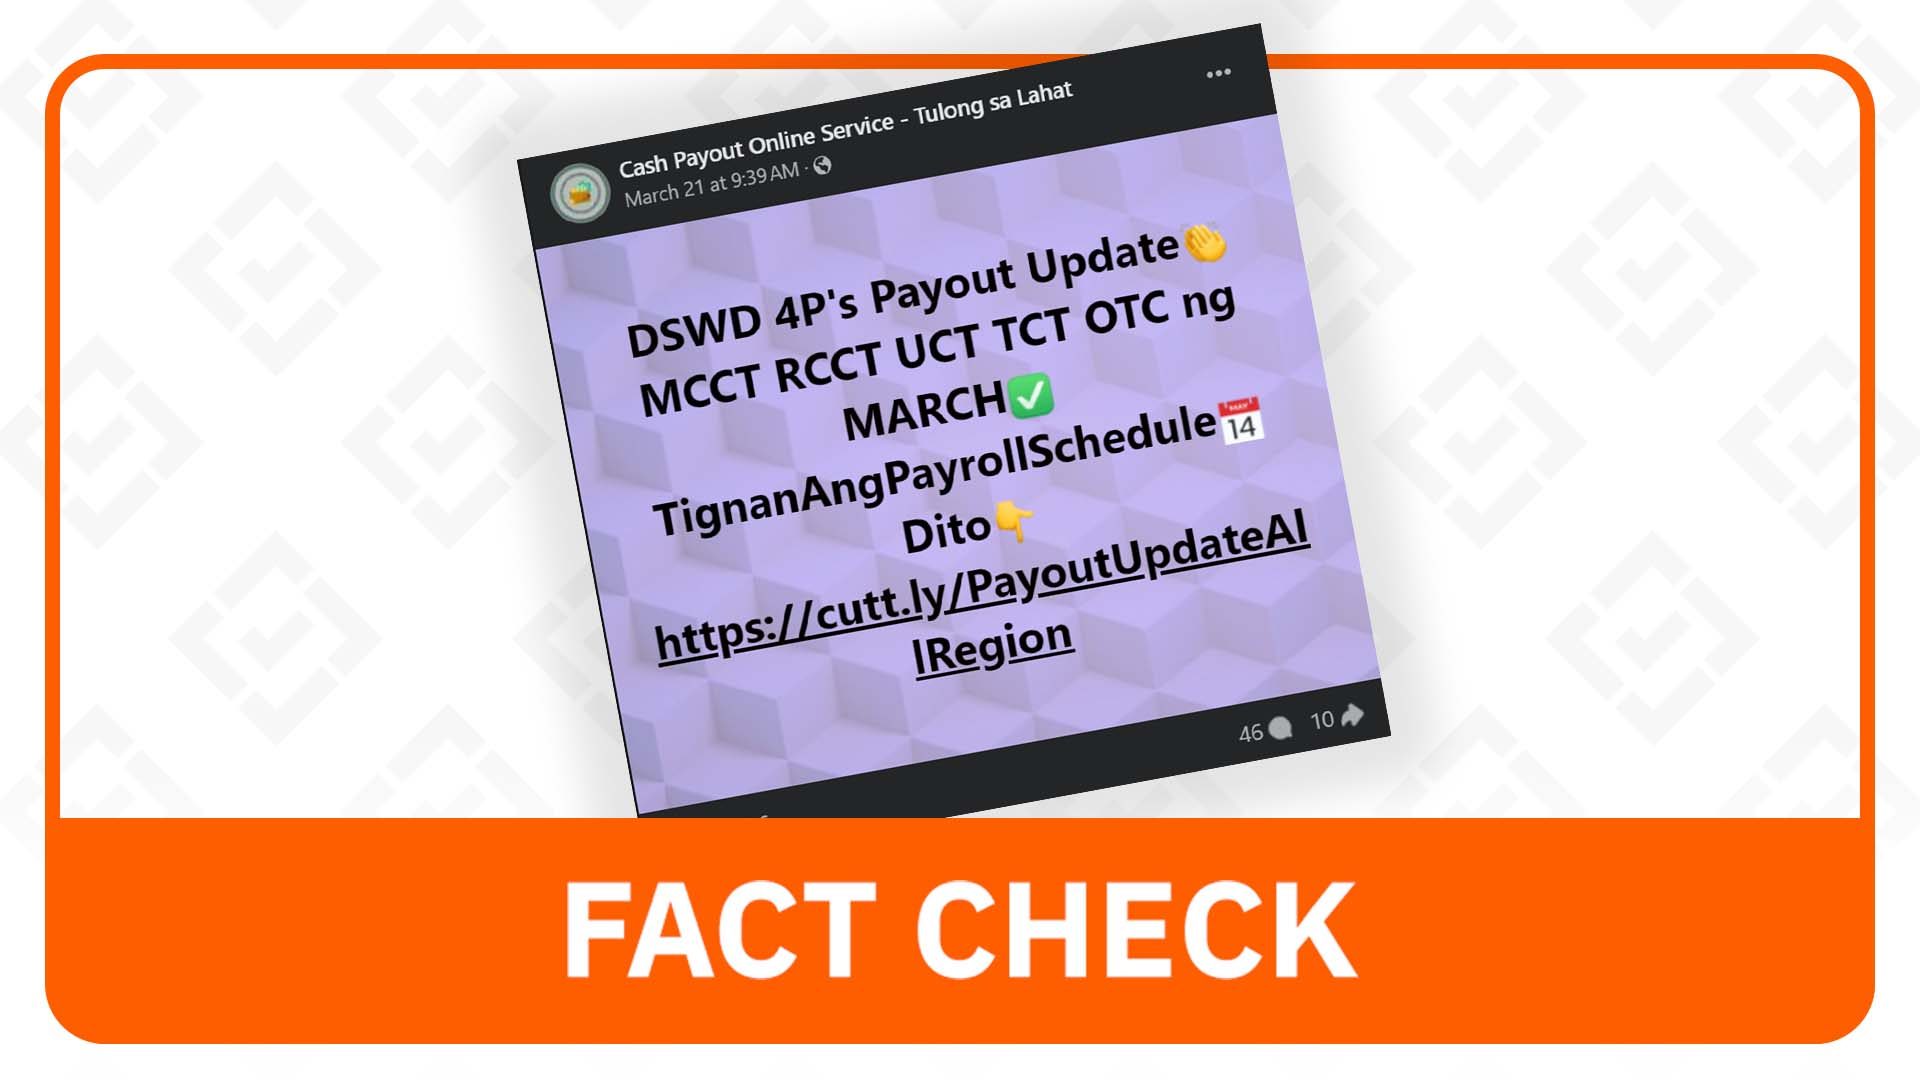 FACT CHECK: Link to 4Ps payout schedule not from DSWD